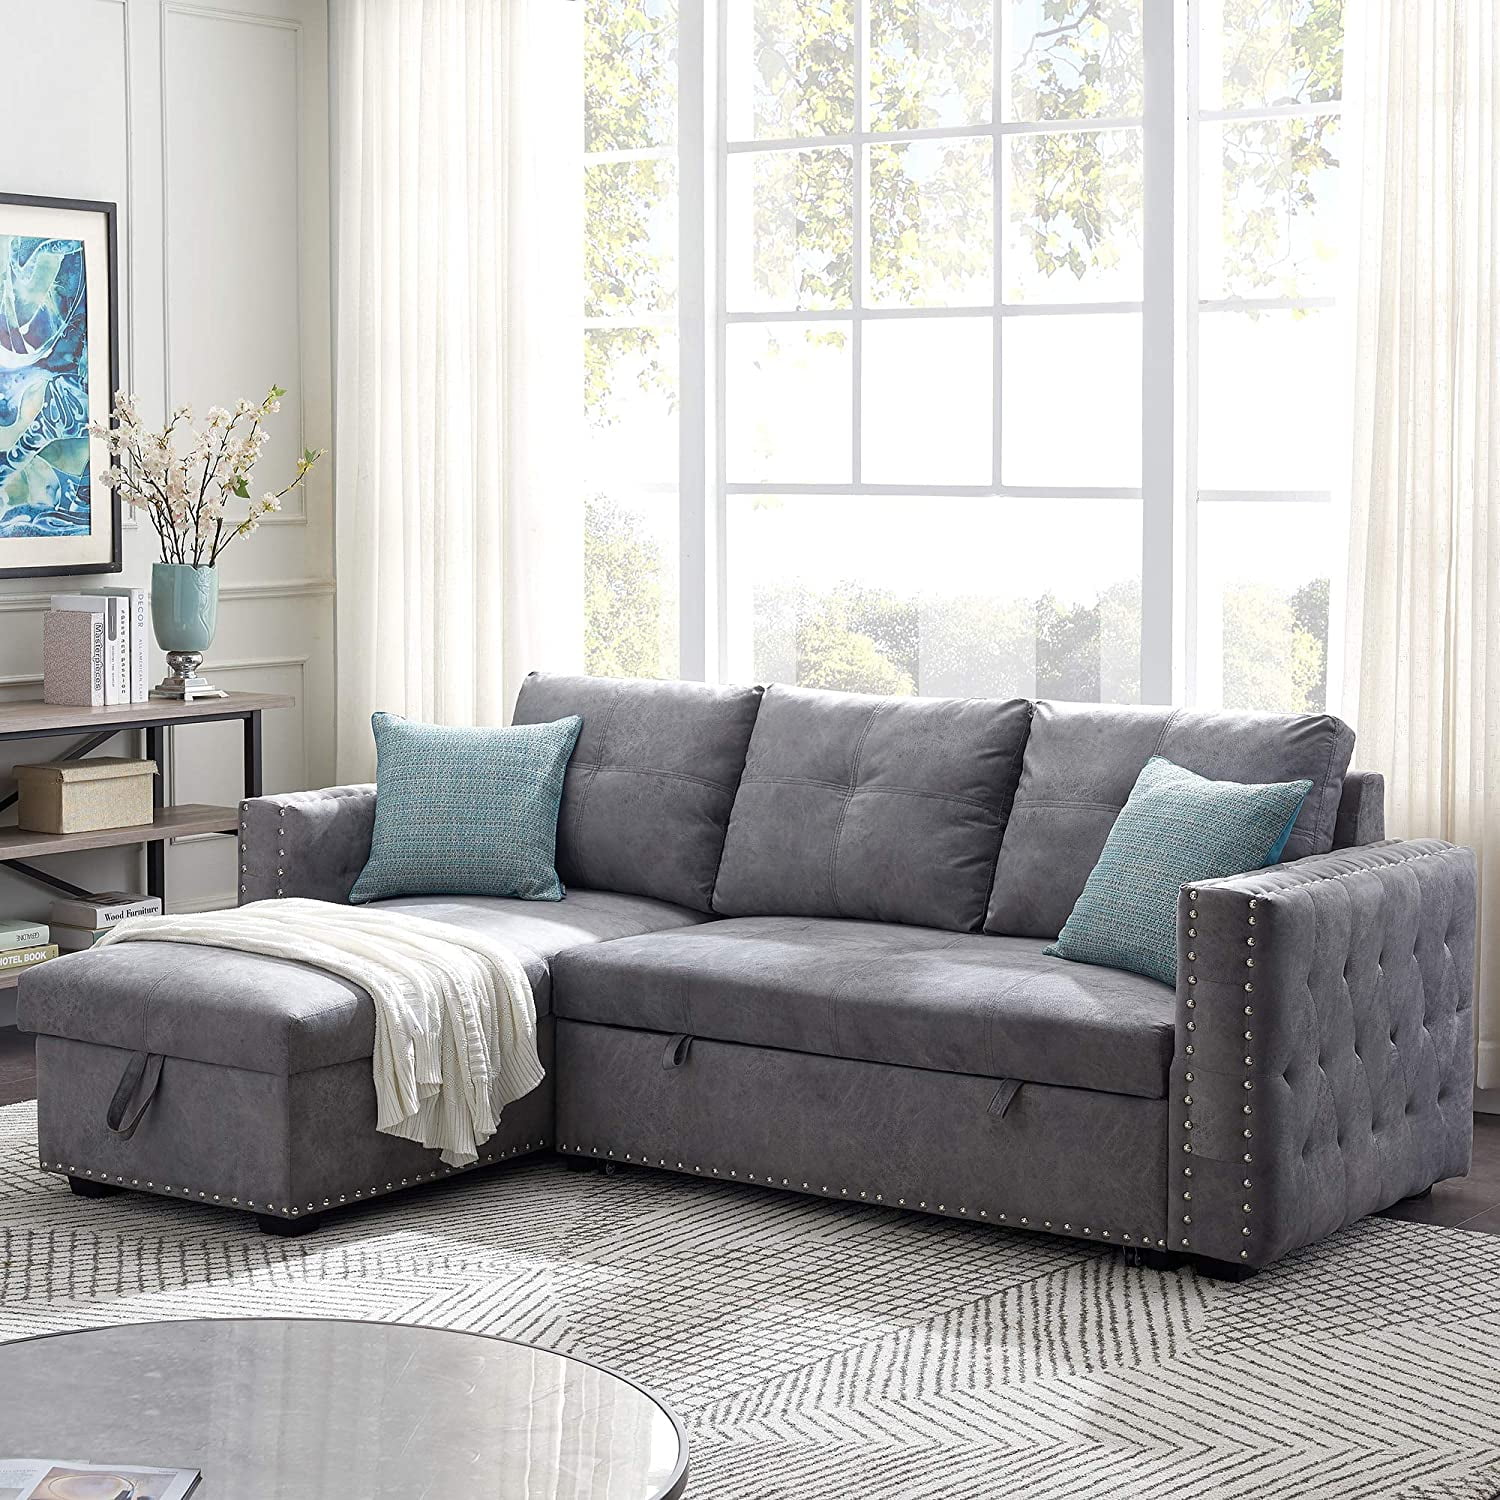 91 Reversible Sleeper Sectional Sofa 3, Pull Out Couch Sleeper Sofa